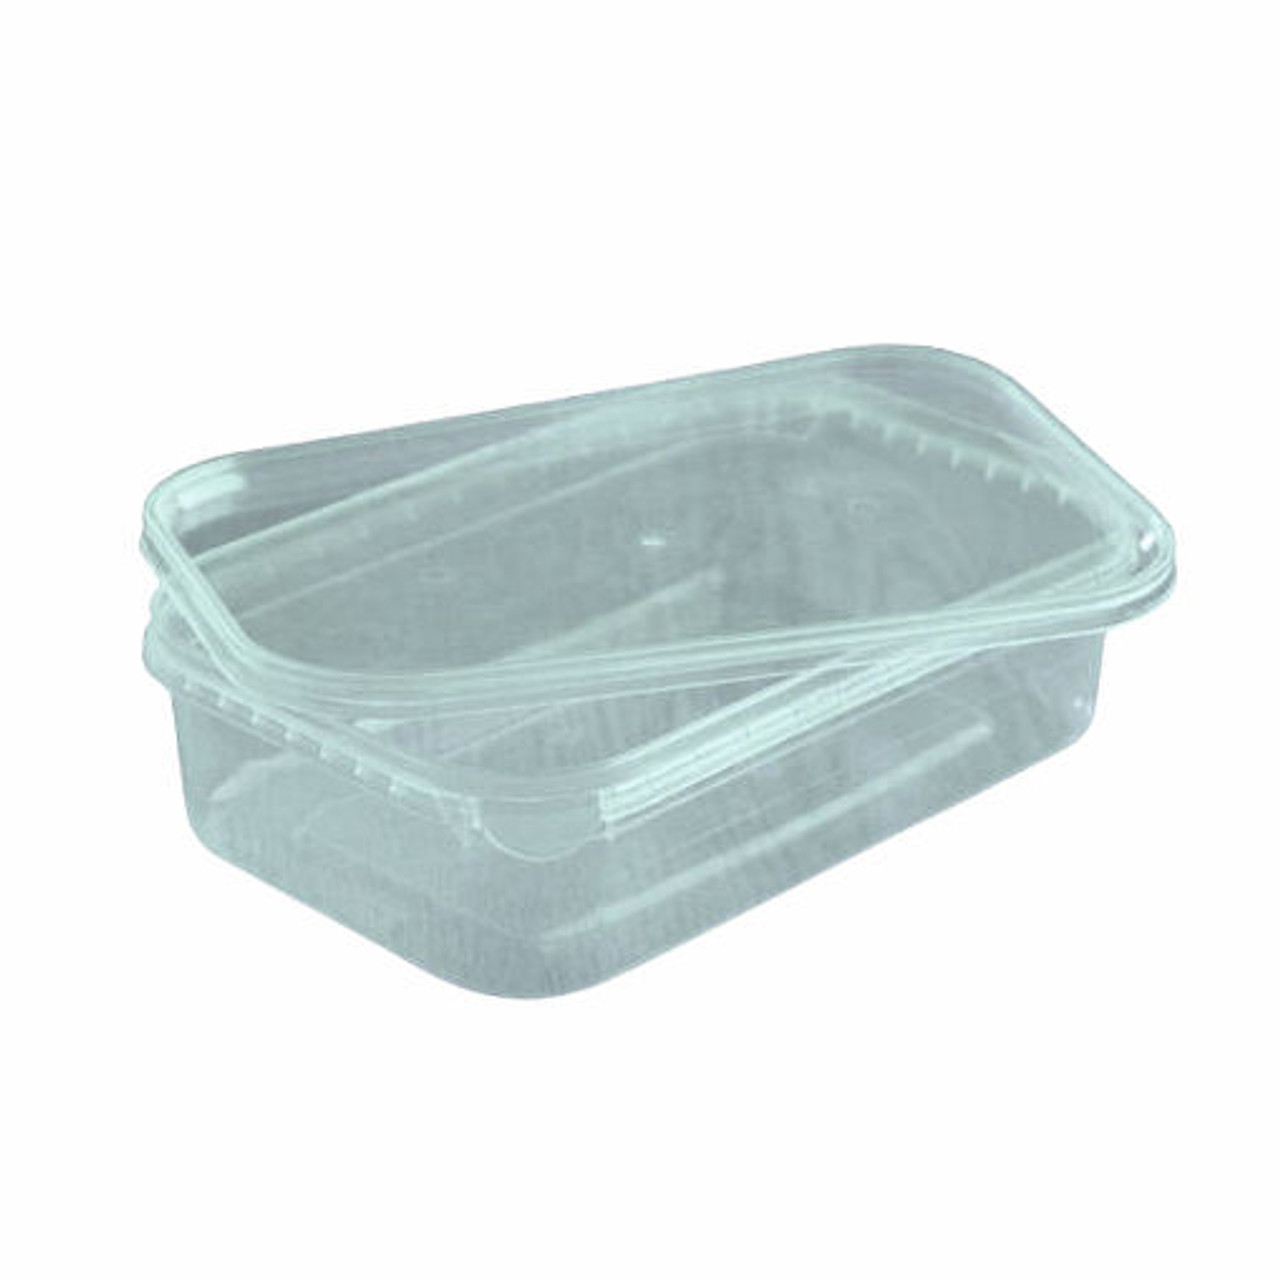 550ml Rectangular Plastic Tamperproof Containers and Lids